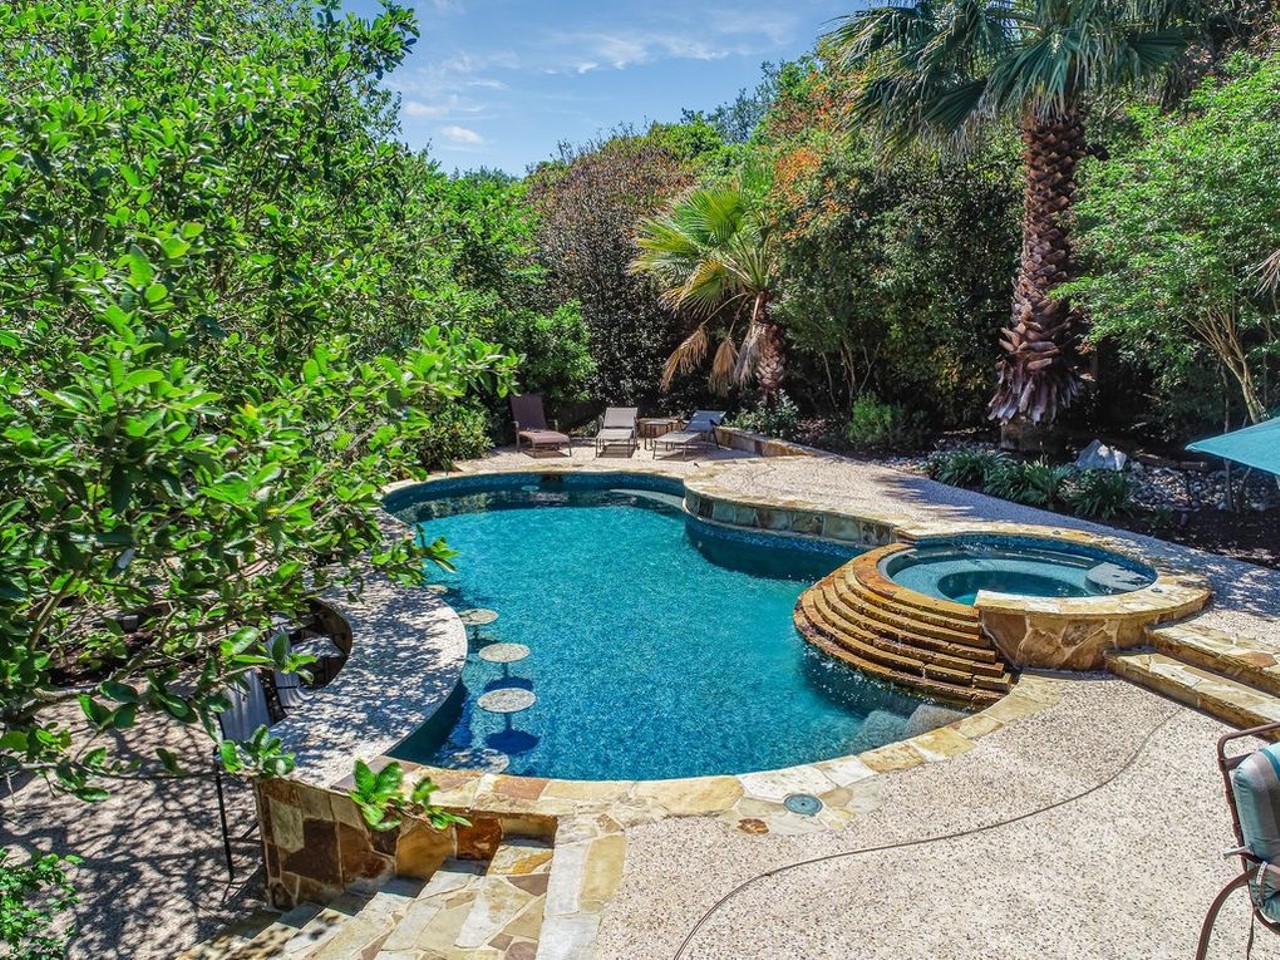 25 Homes for Sale in San Antonio With Completely Over-the-Top Pools